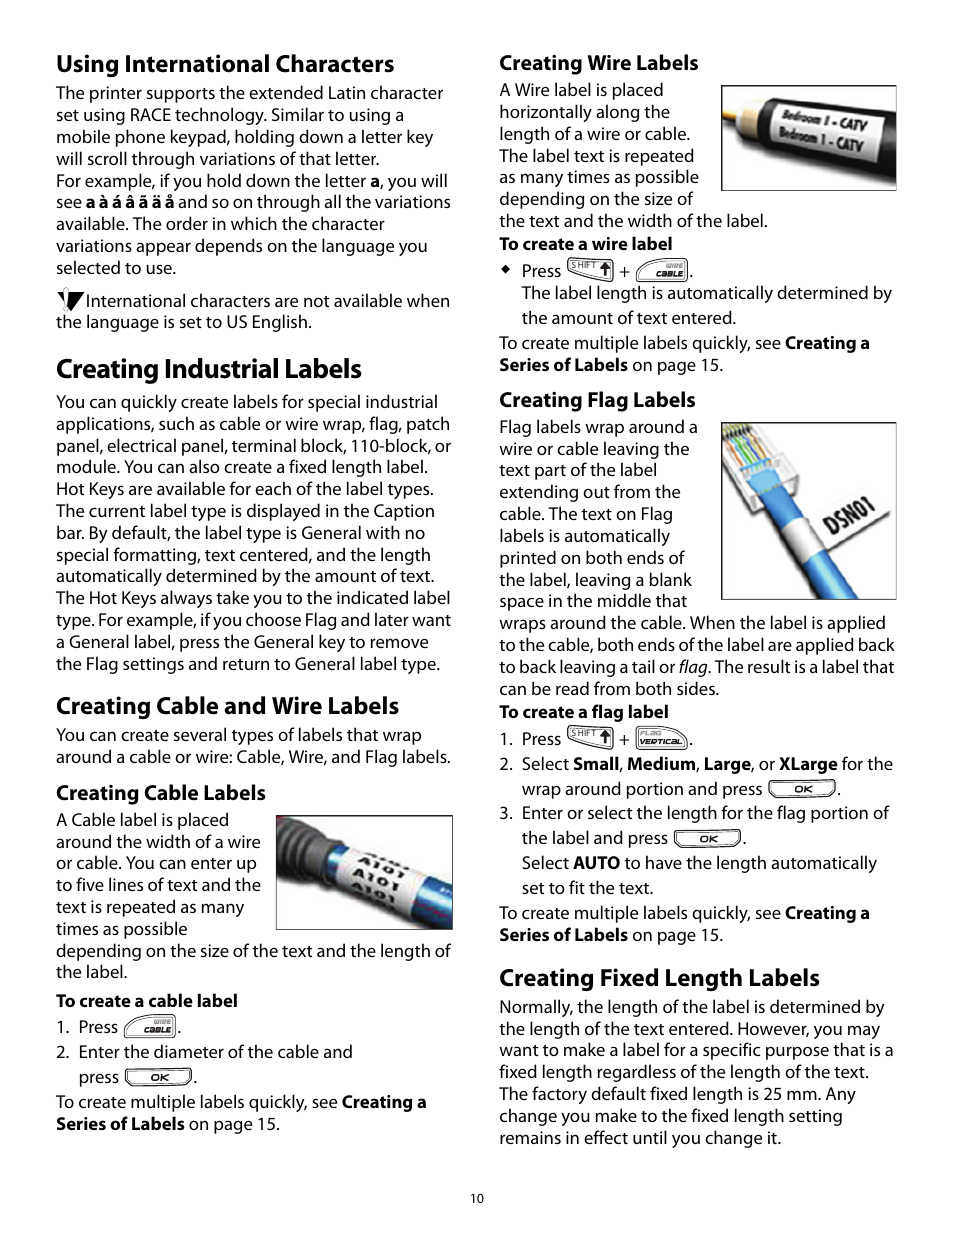 Using international characters, Creating industrial labels, Creating cable  and wire labels | Dymo Rhino 5200 User Manual | Page 10 / 24 | Original mode